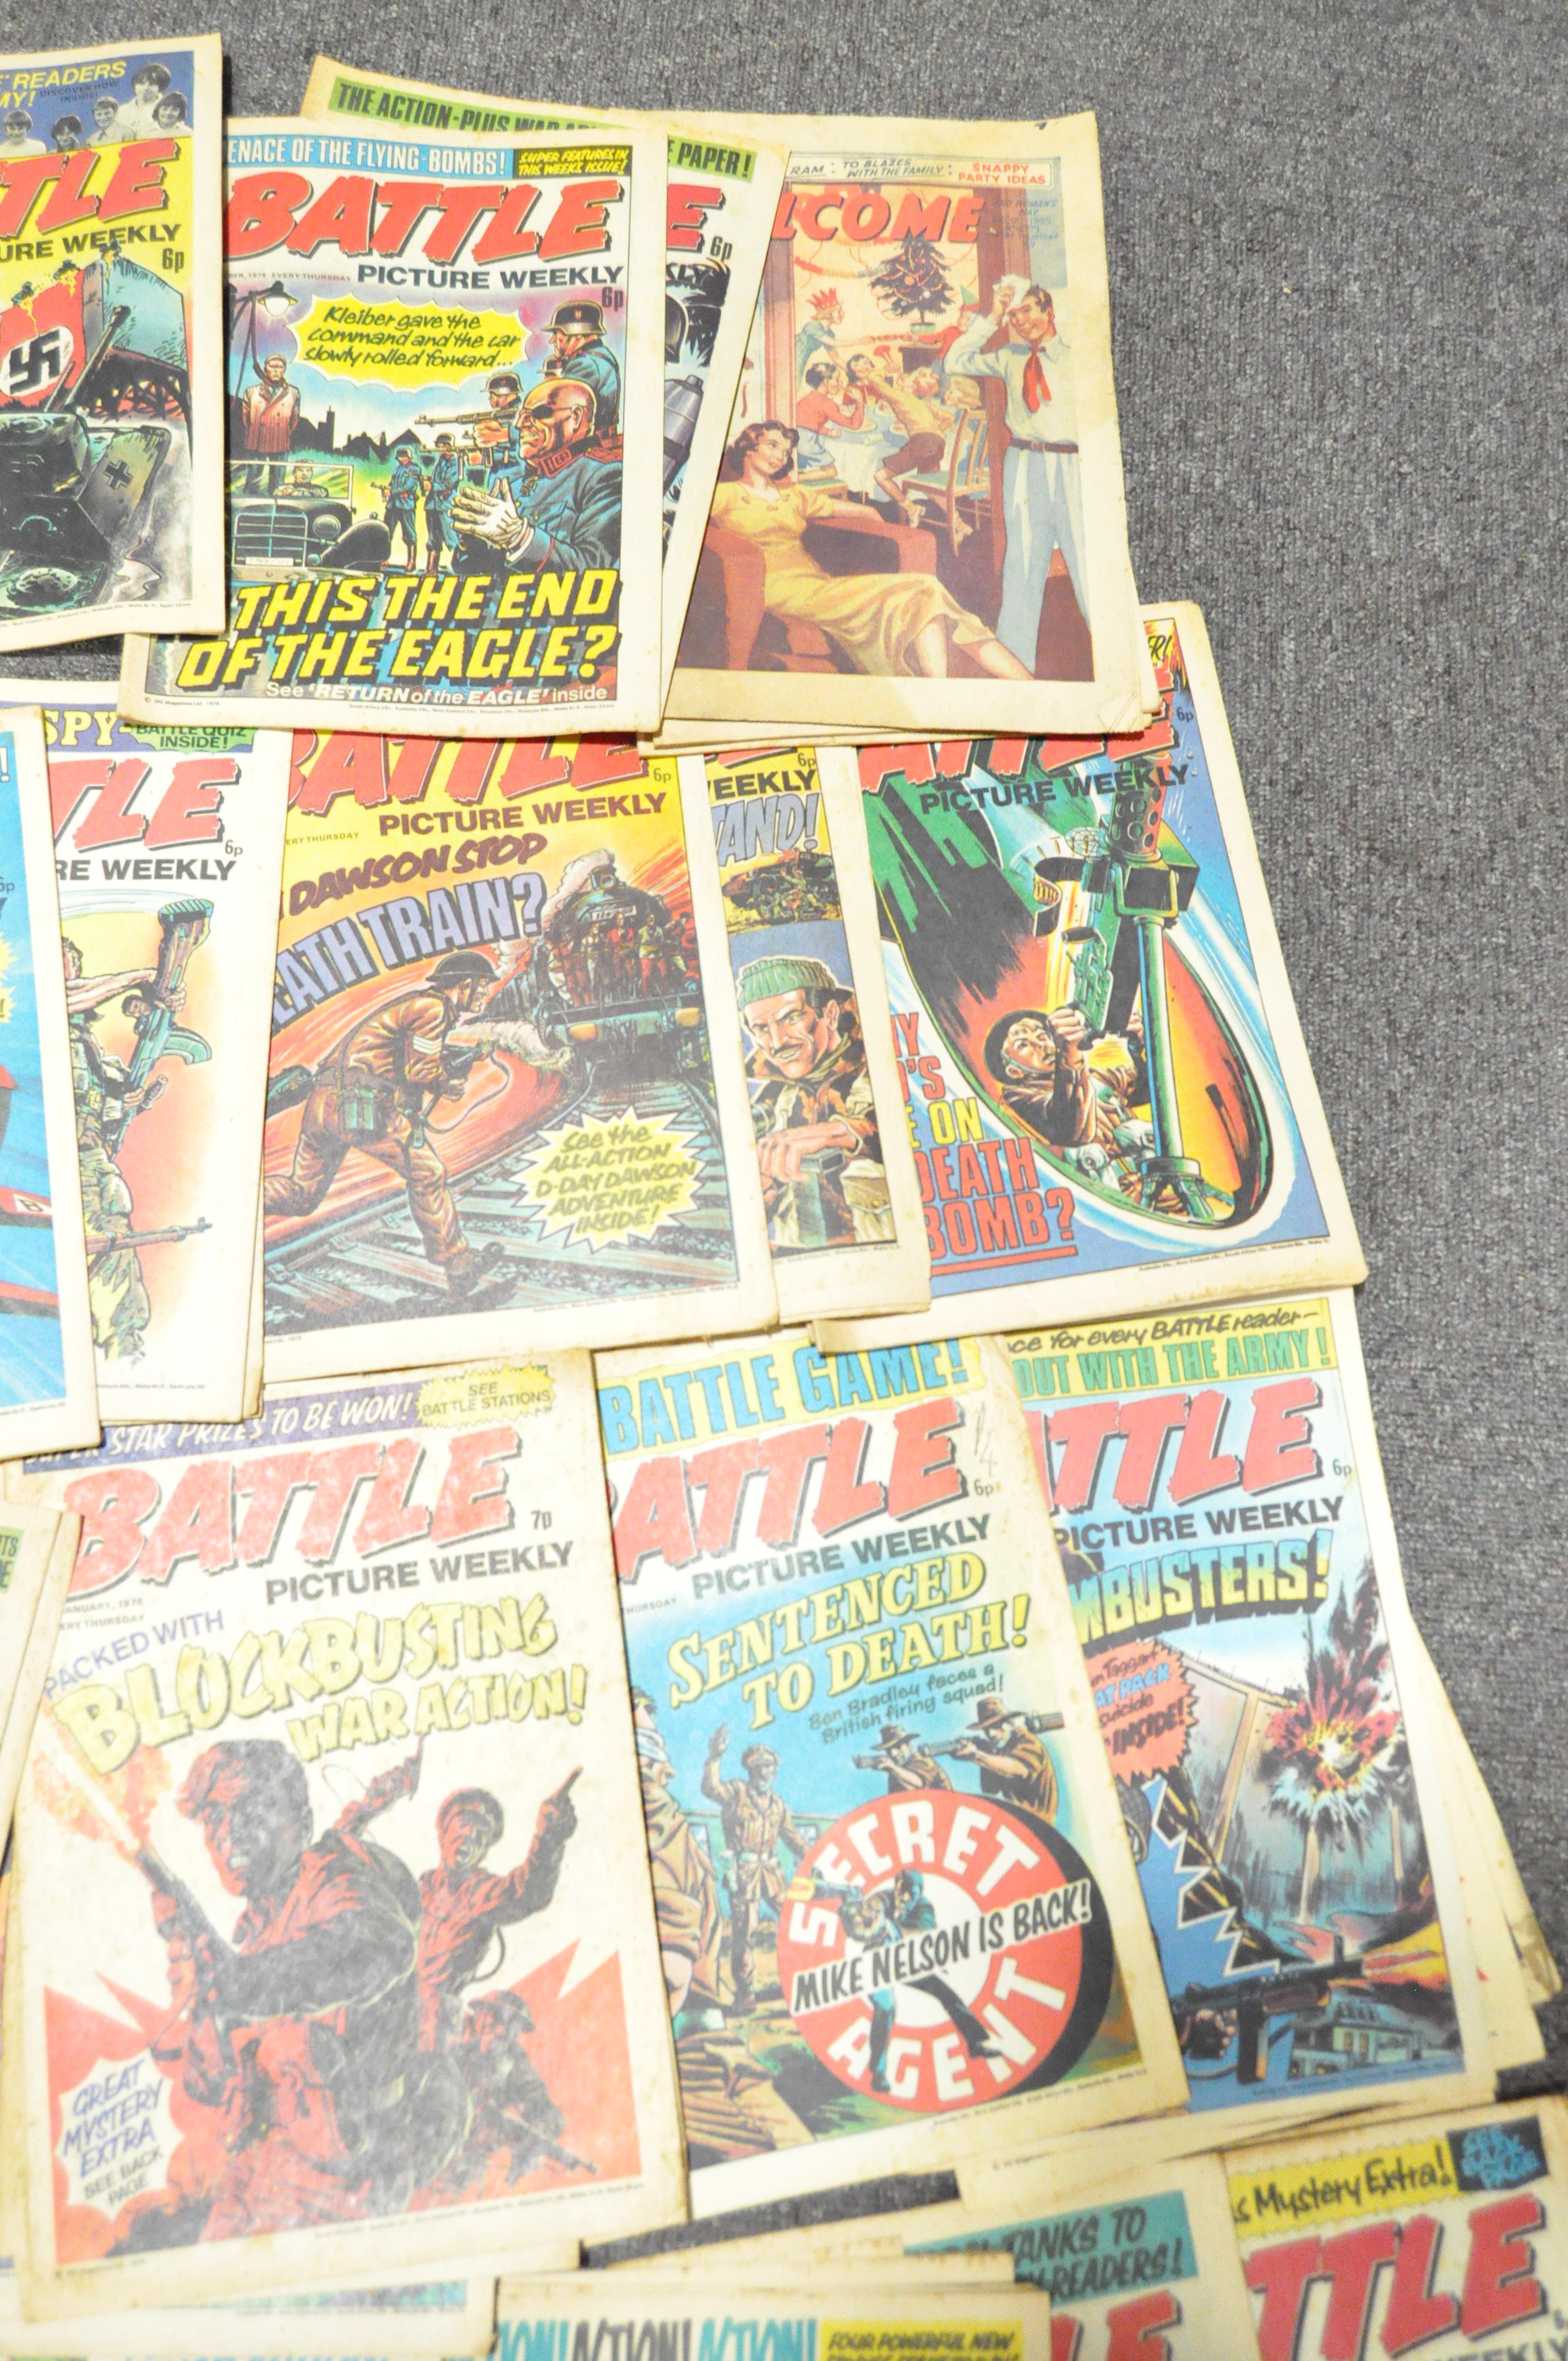 A collection of vintage comic books, including Battle and Dandy, - Image 8 of 8